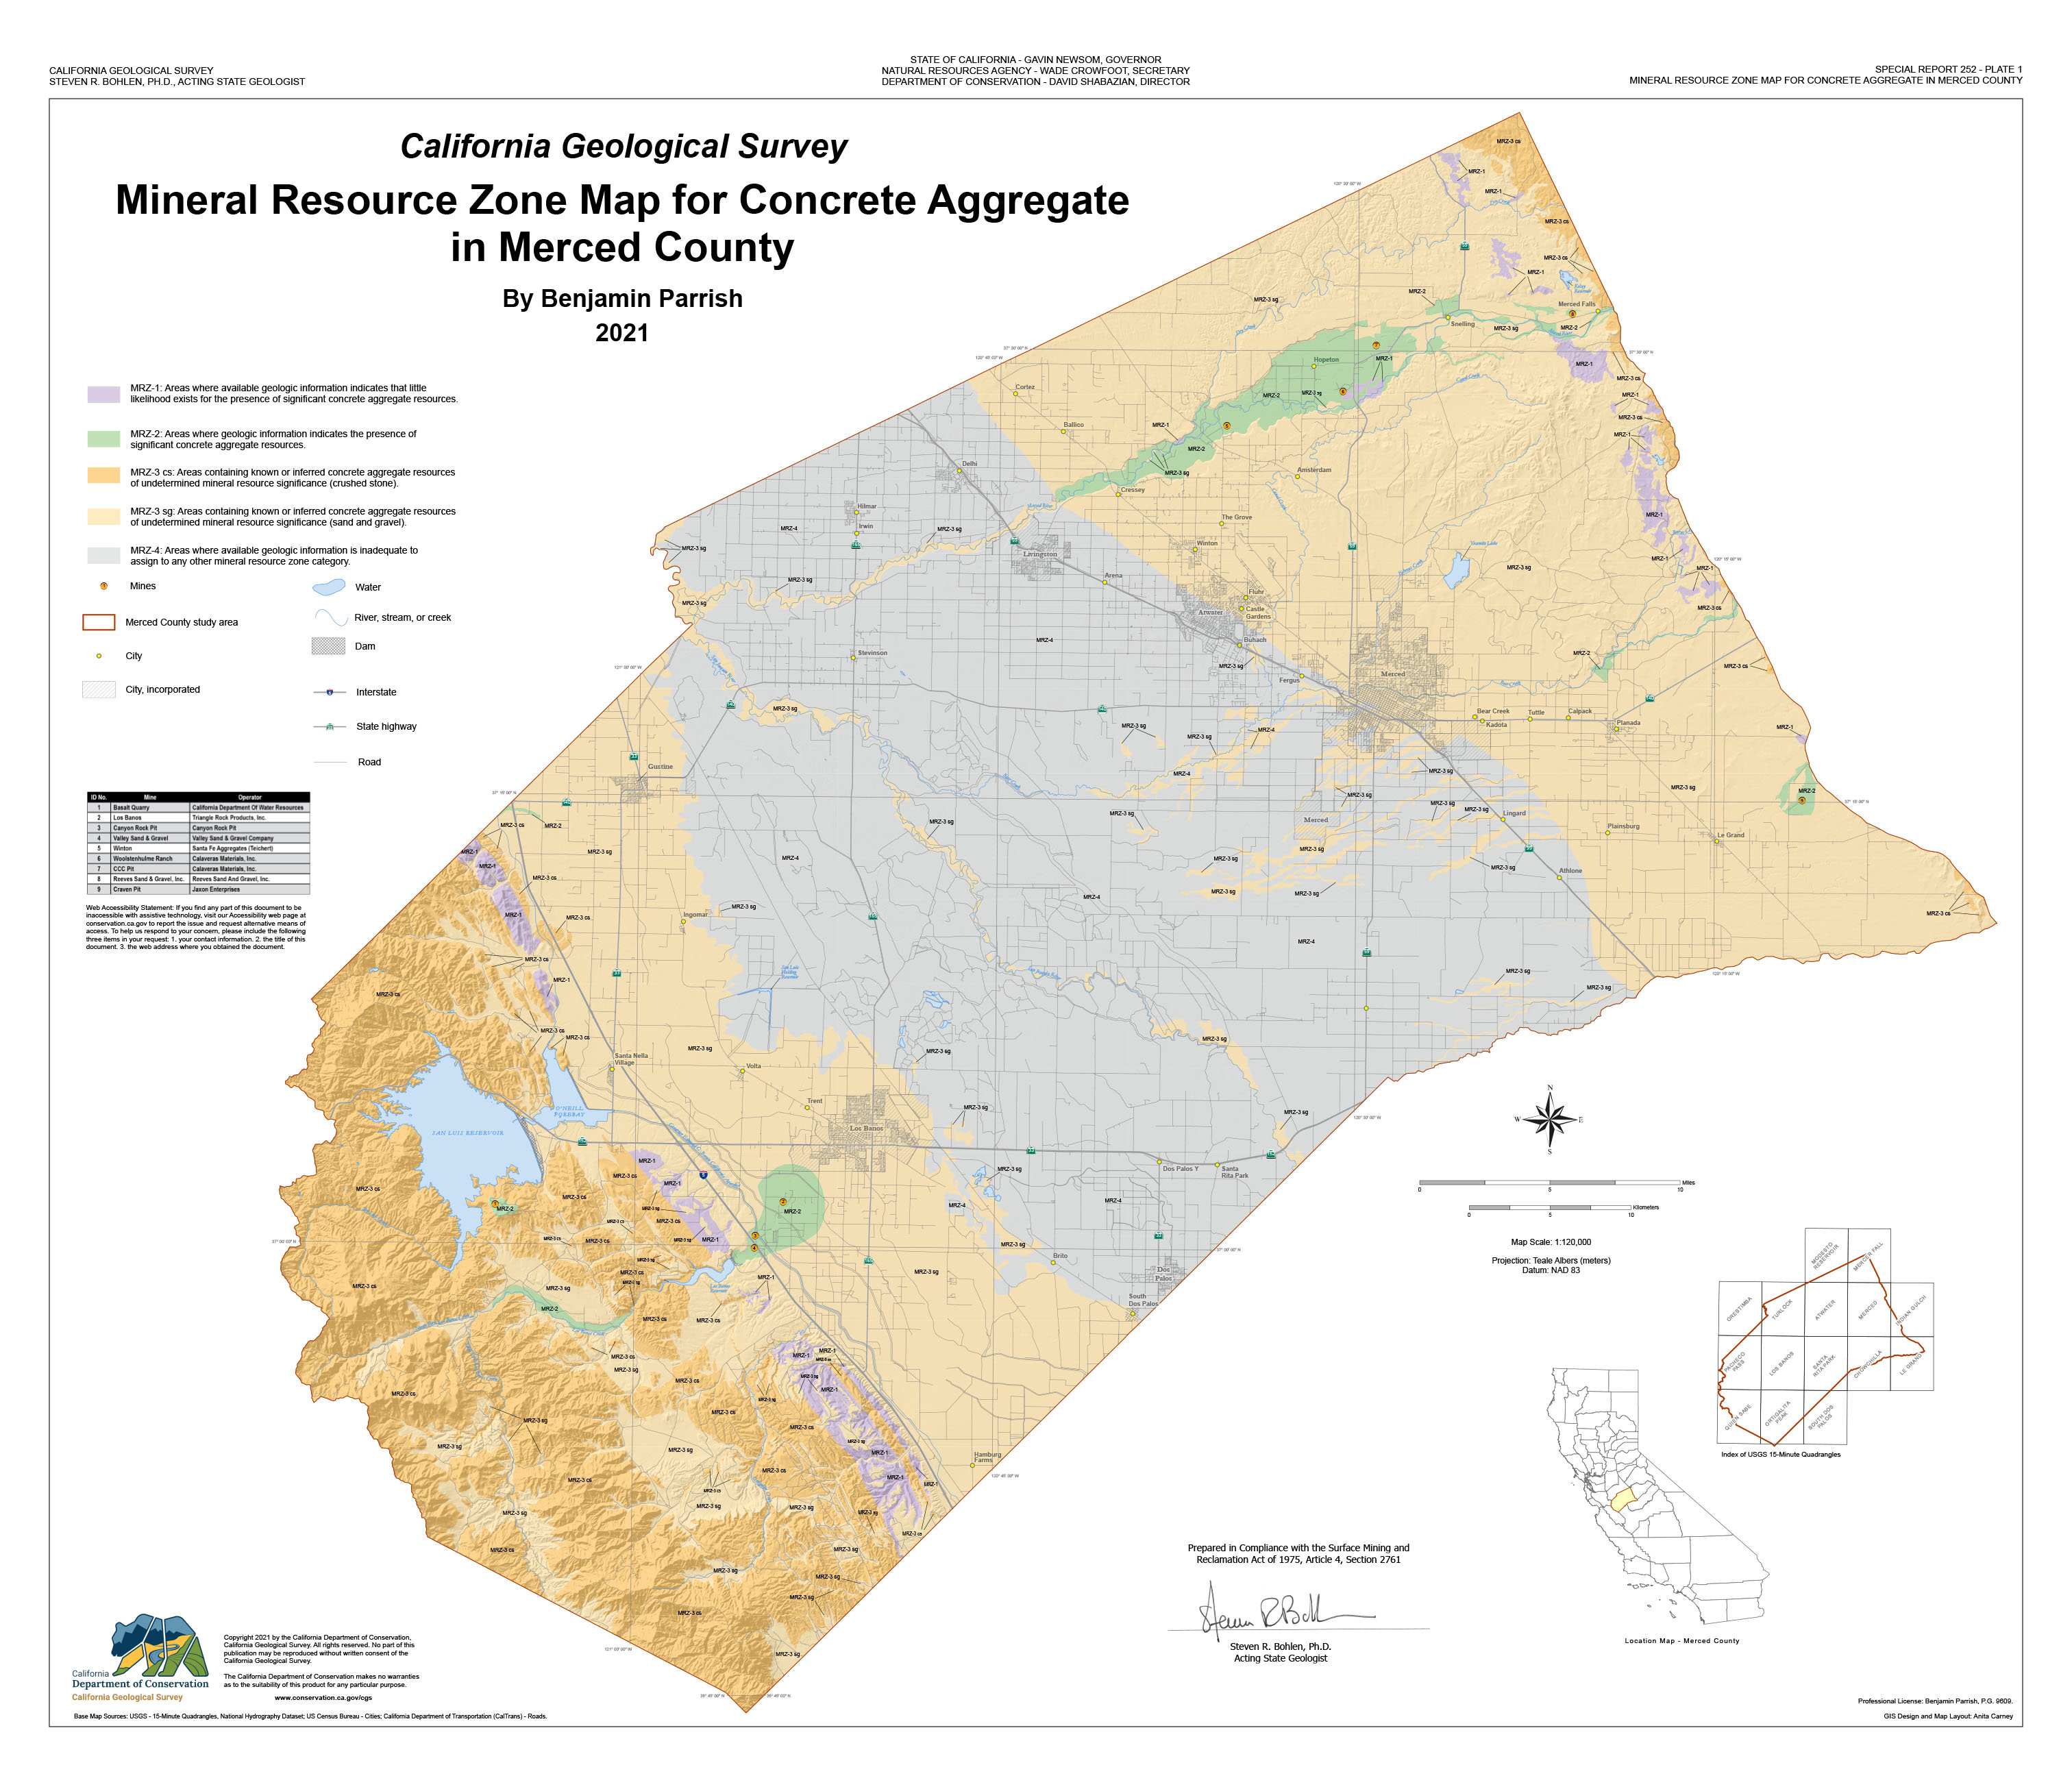 Thumbnail image of SR 252 Plate 1, map of Merced County Mineral Resource Zones.